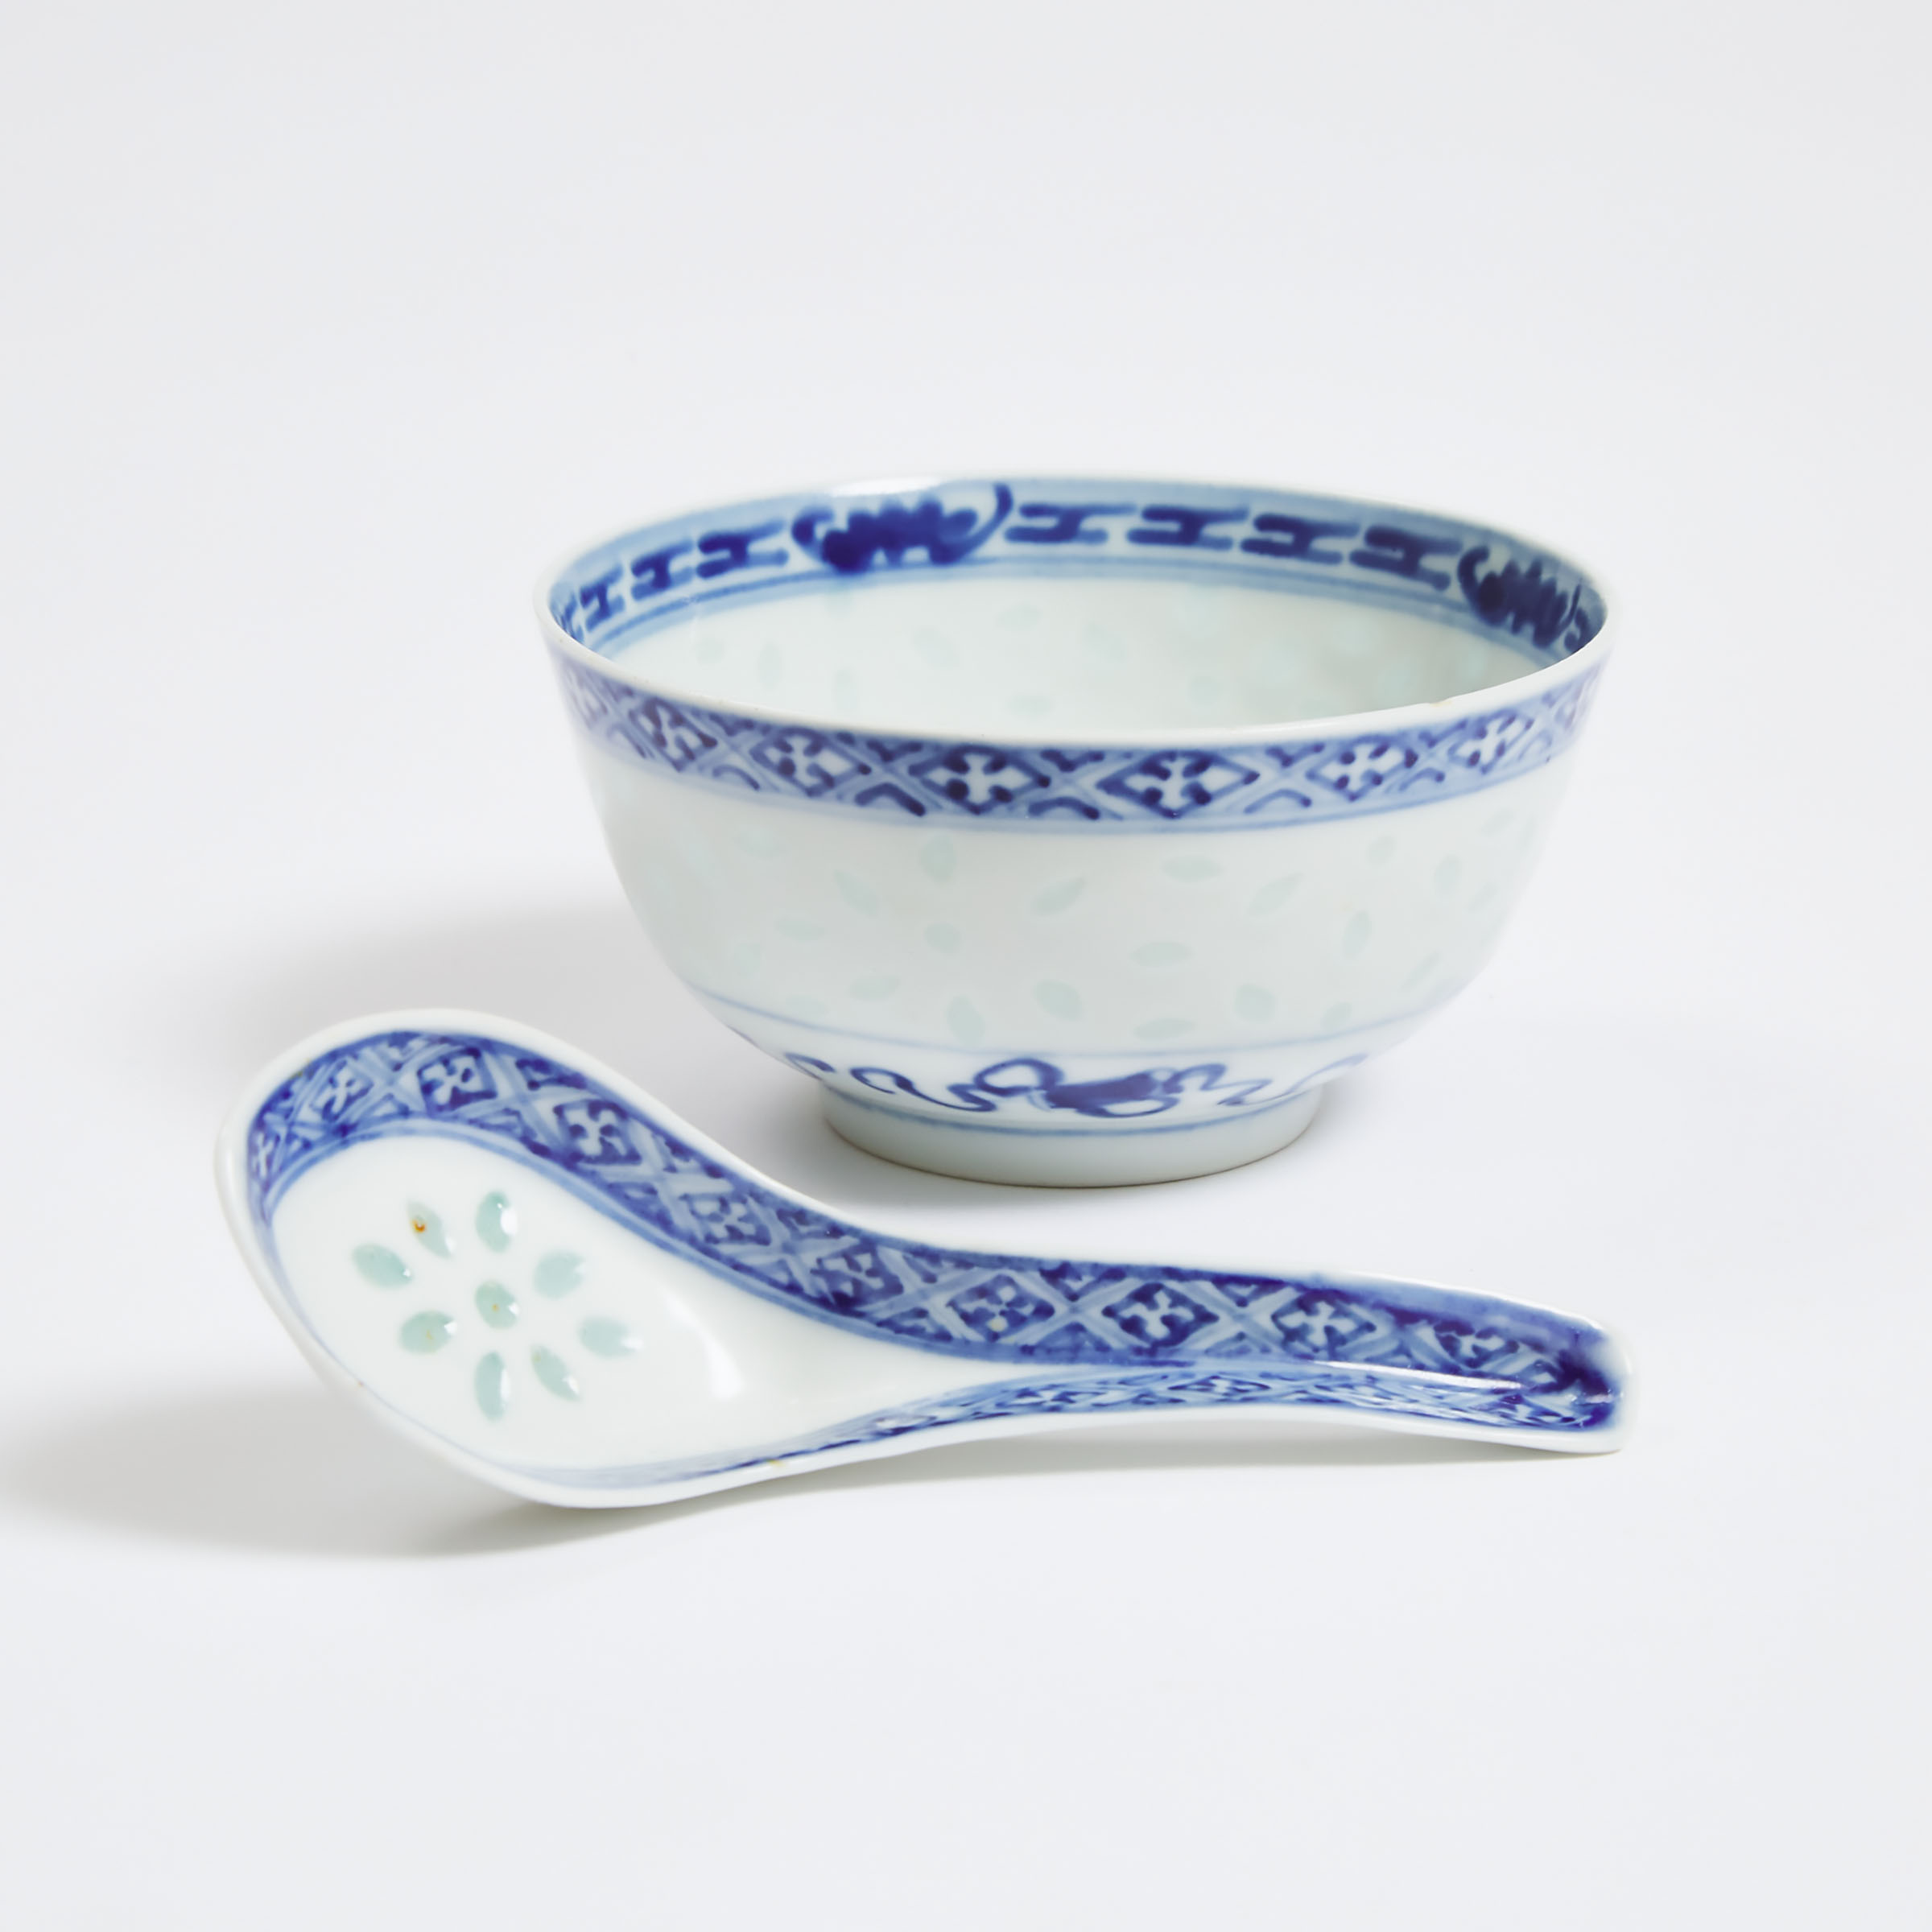 A Chinese Blue and White 'Rice-Grain' Porcelain Bowl with Spoon Set, Late Qing Dynasty/Republican Period, 19th/Early 20th Century